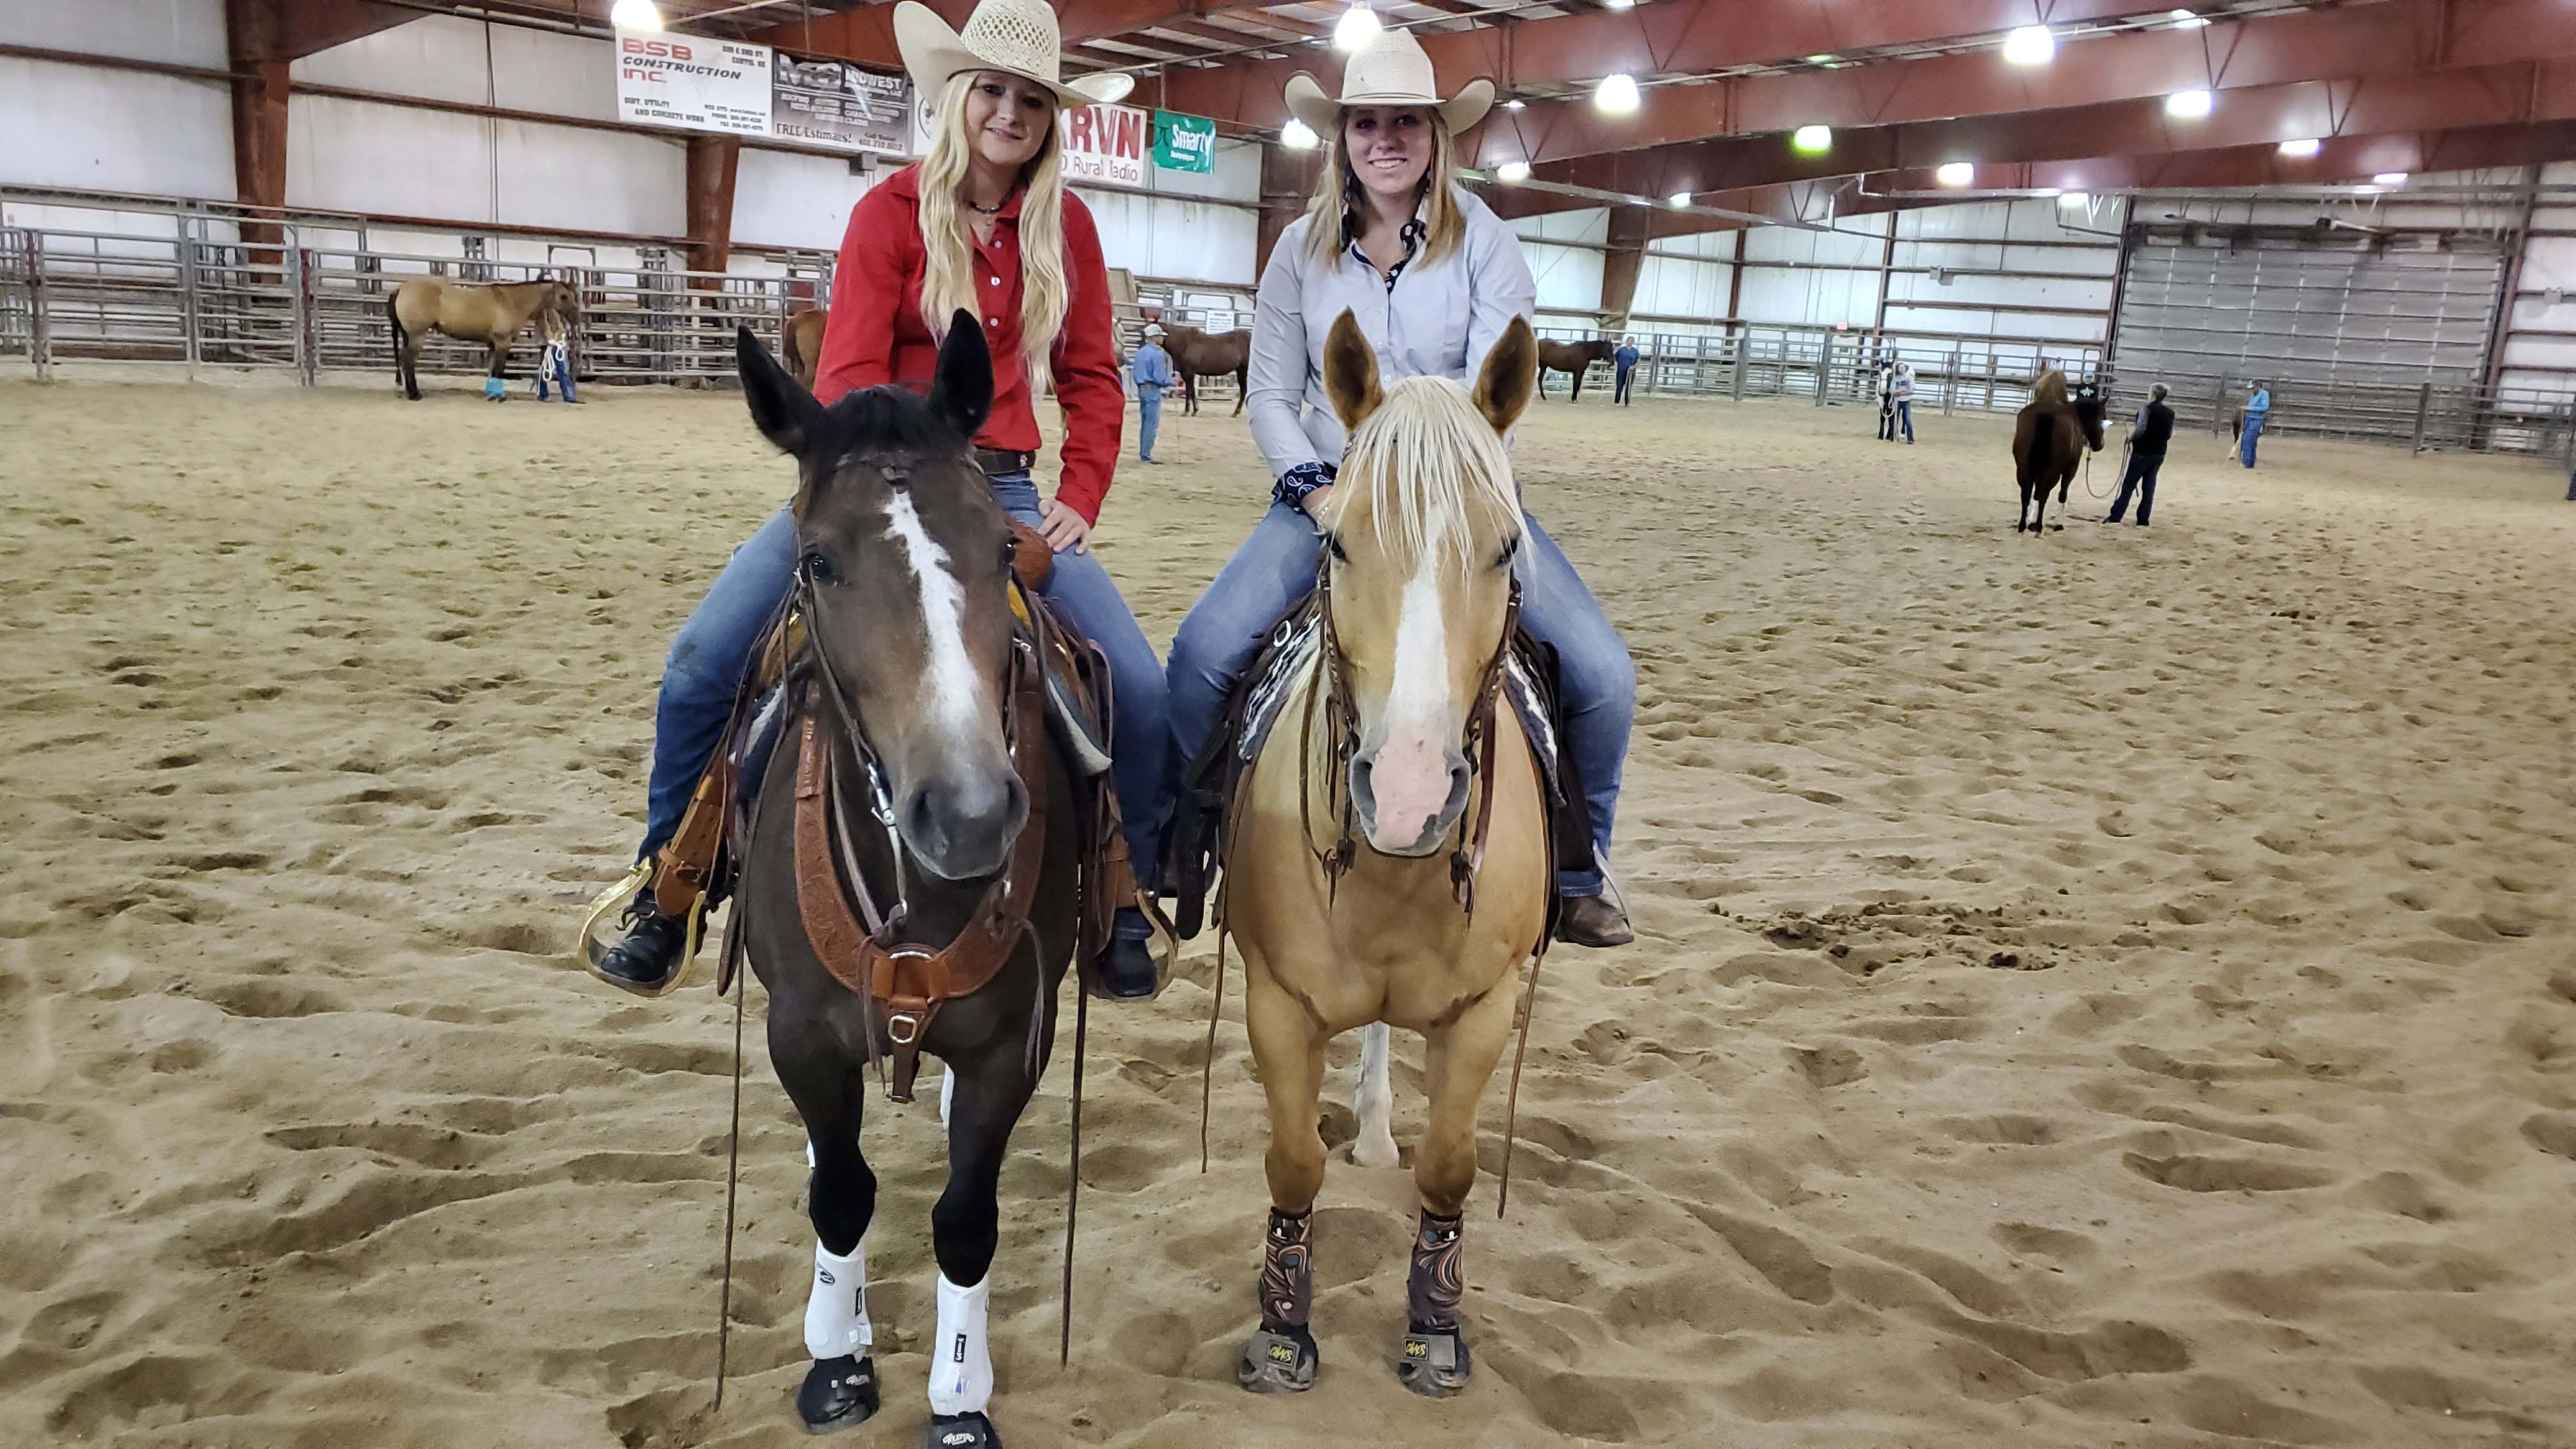 Academic majors can lead to competition teams for NCTA Aggies. Friends Addison Villwok and Annie Bassett competed on the Ranch Horse Team last year. Their college careers started with application made to NCTA when they were high school seniors at Randolph and Gothenburg, respectively. (Crawford / NCTA News photo)